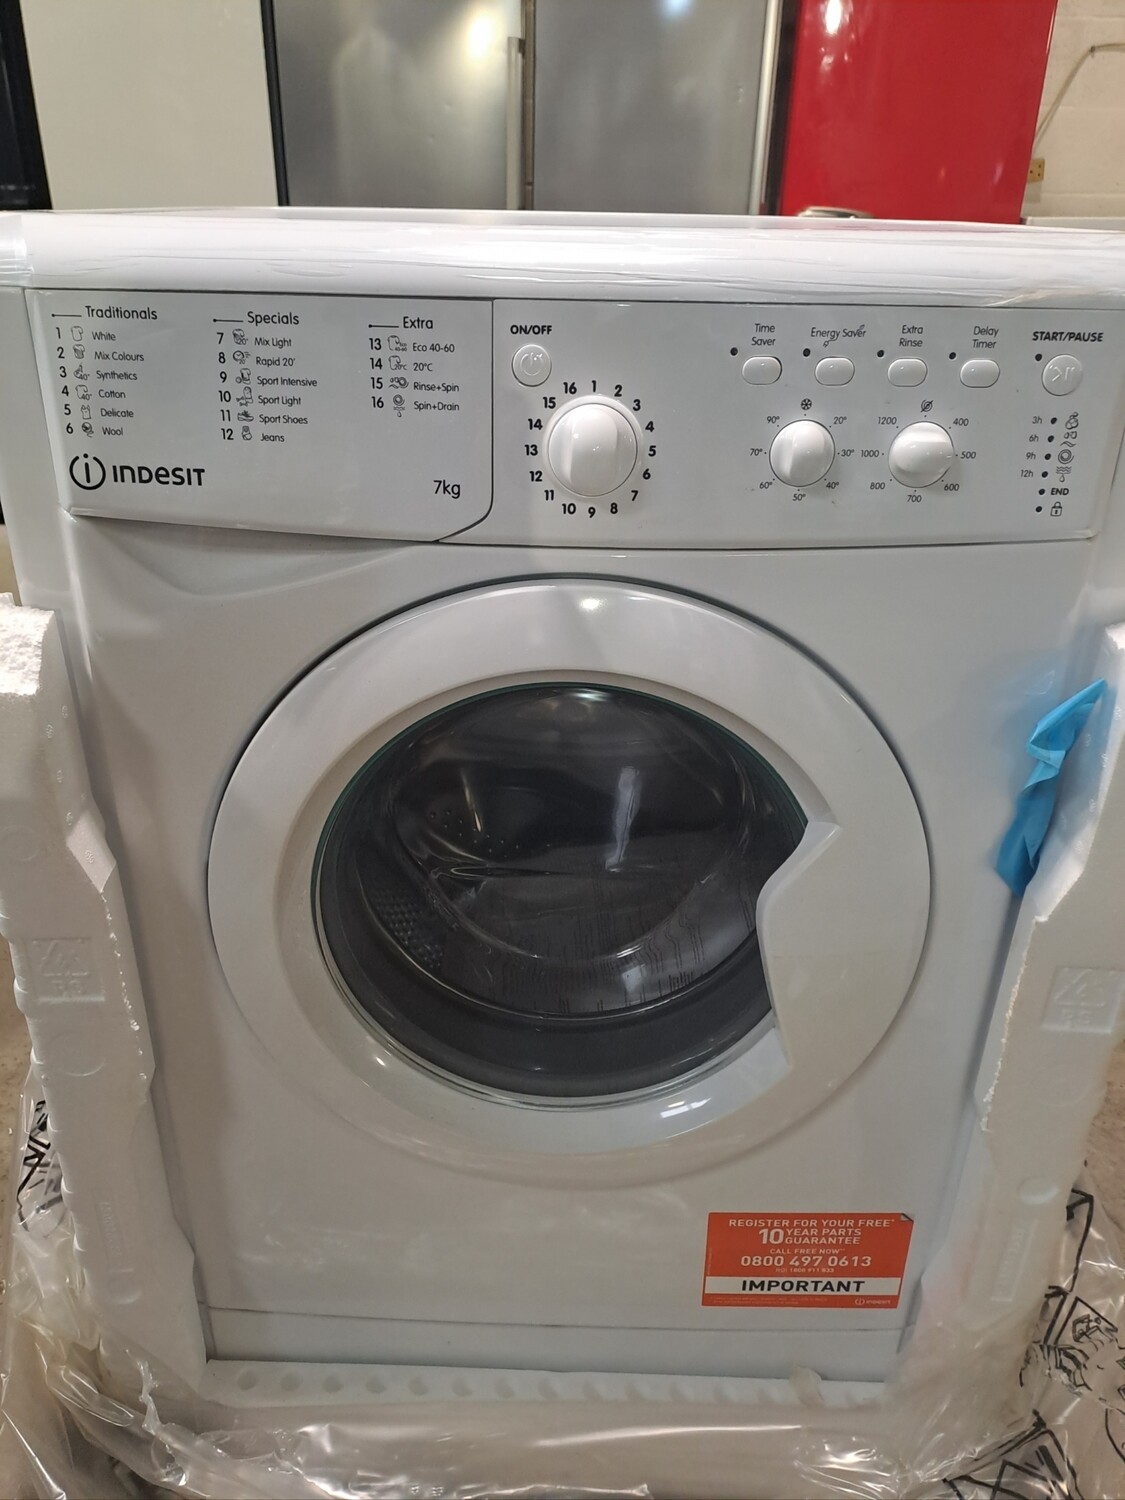 Indesit IWC71252 7kg Load 1200 Spin Washing Machine - White - Brand New - 12 Month Guarantee + 10 Year Parts. This item is located at our Whitby Road Shop